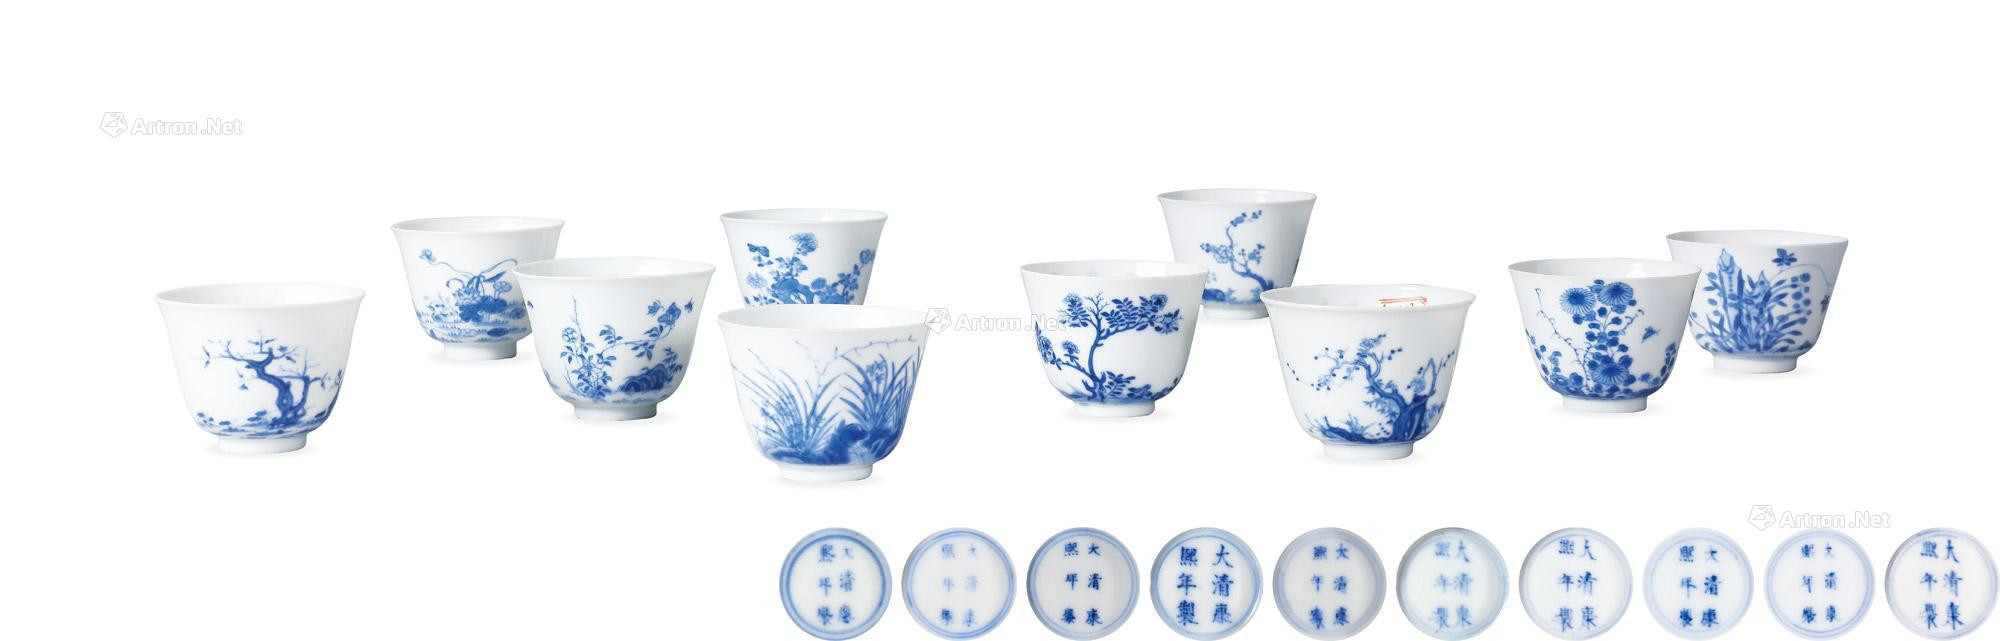 TEN EXTREMELY RARE BLUE AND WHITE‘MONTN’ CUPS